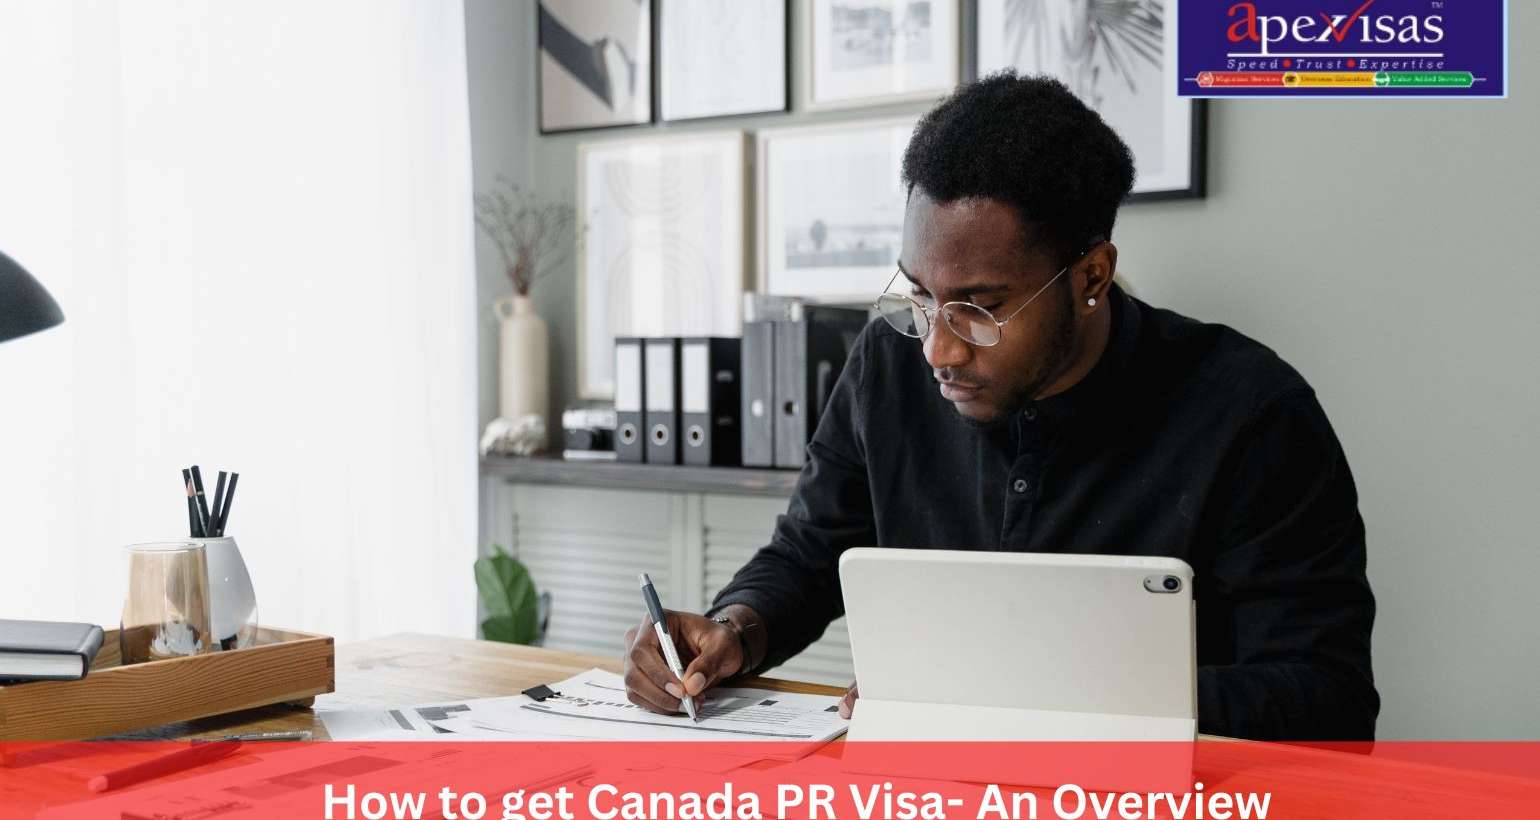 How to get Canada PR Visa- An Overview